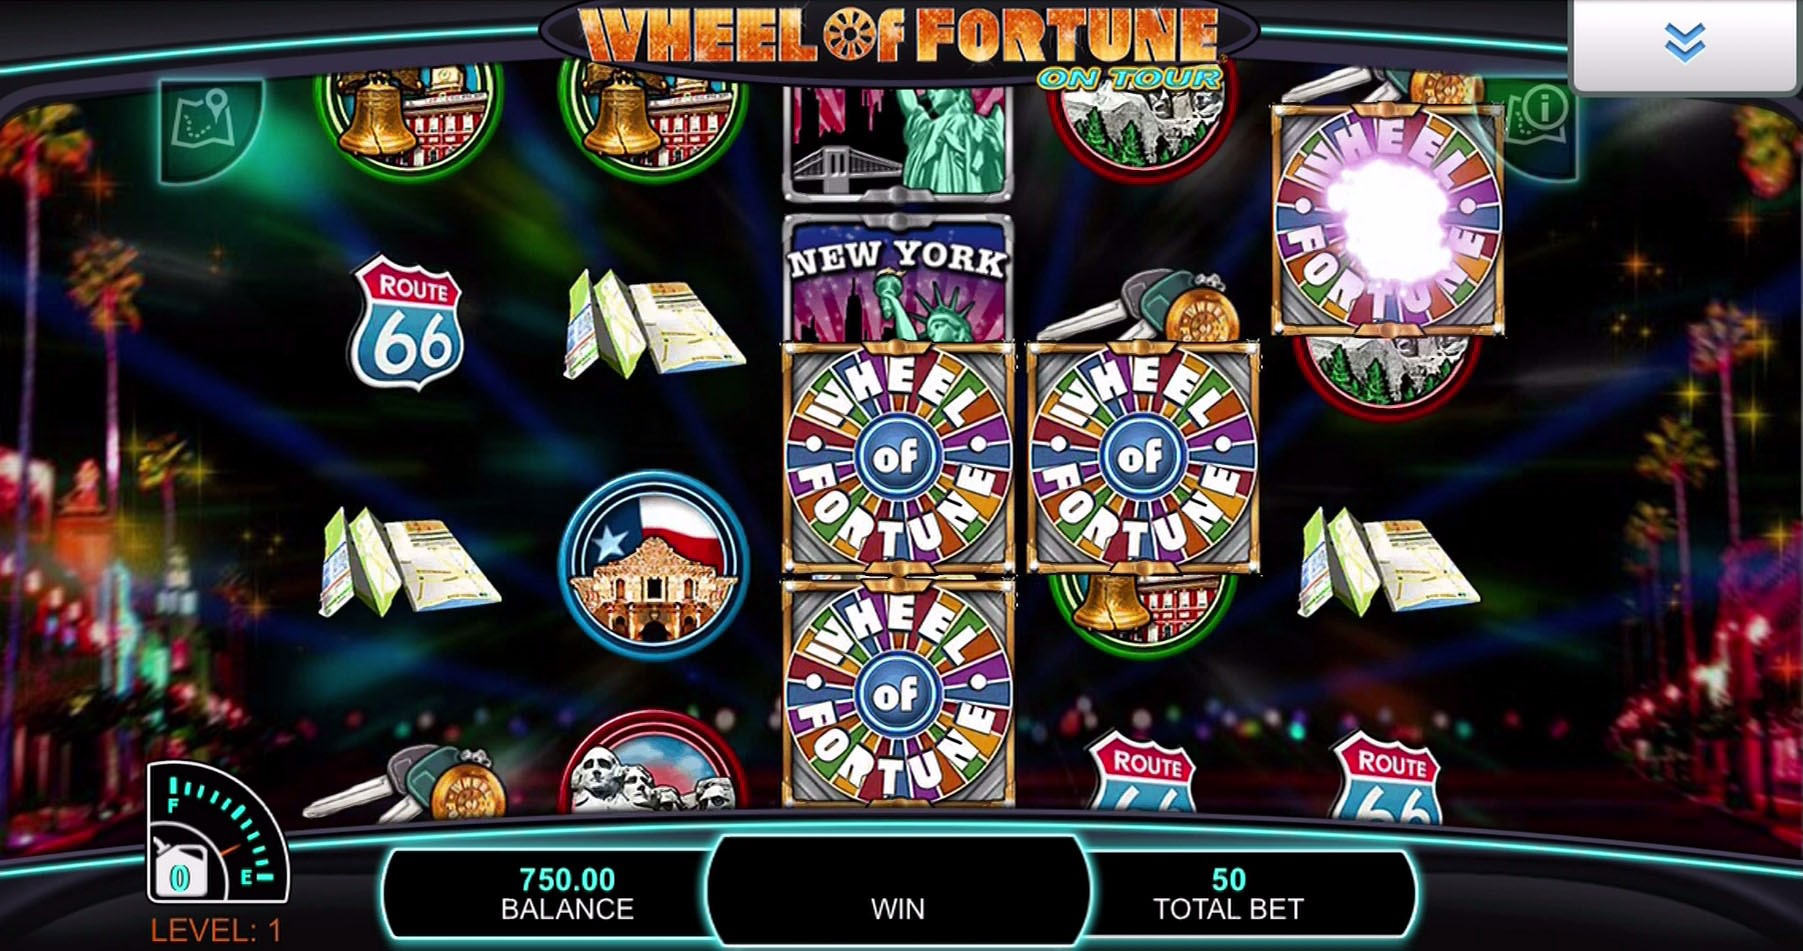 Mystery Wilds appear during Wheel of Fortune On Tour video slot game at PlayOJO